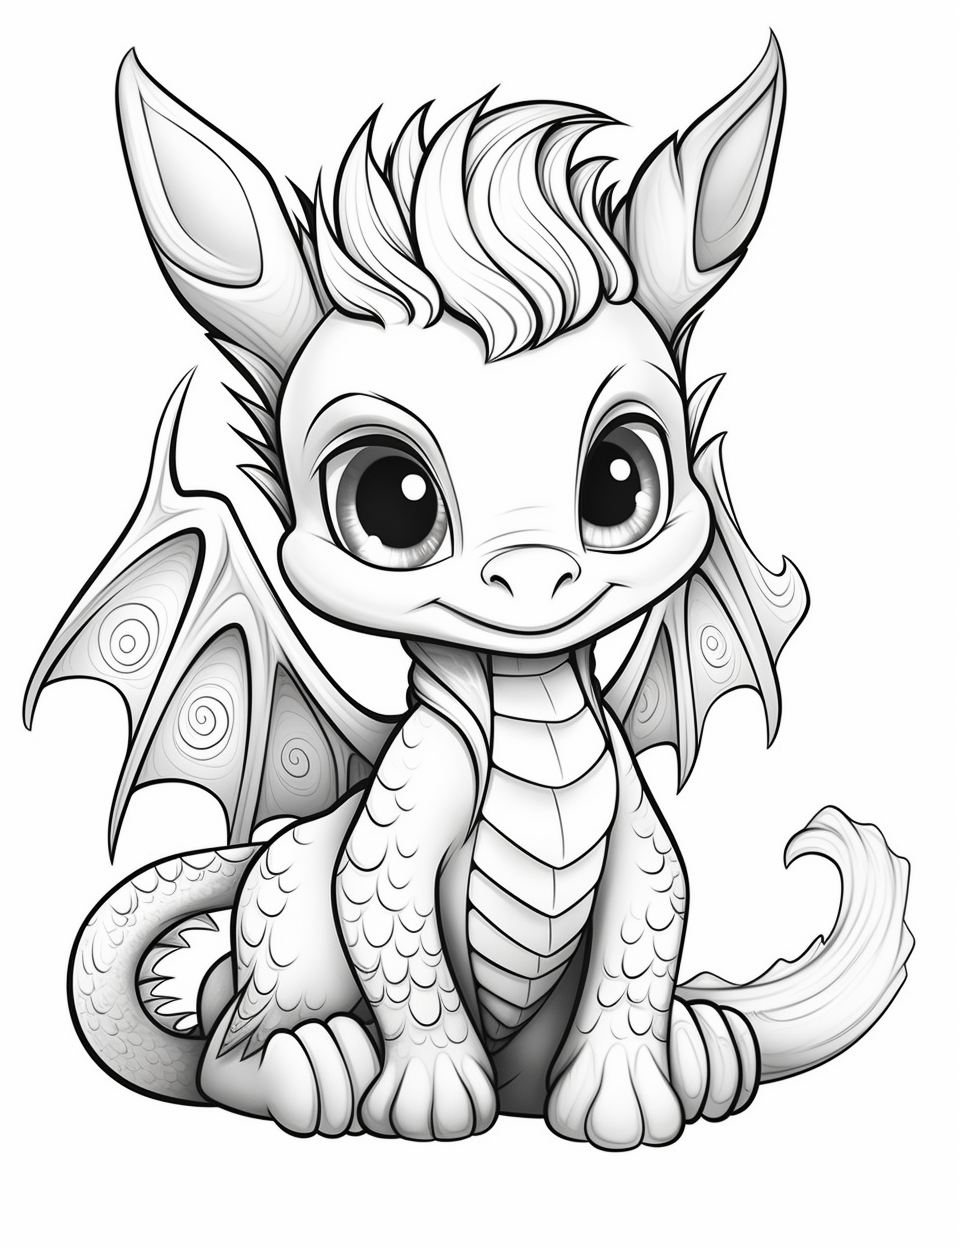 Cute dragons coloring book for children coloring pages